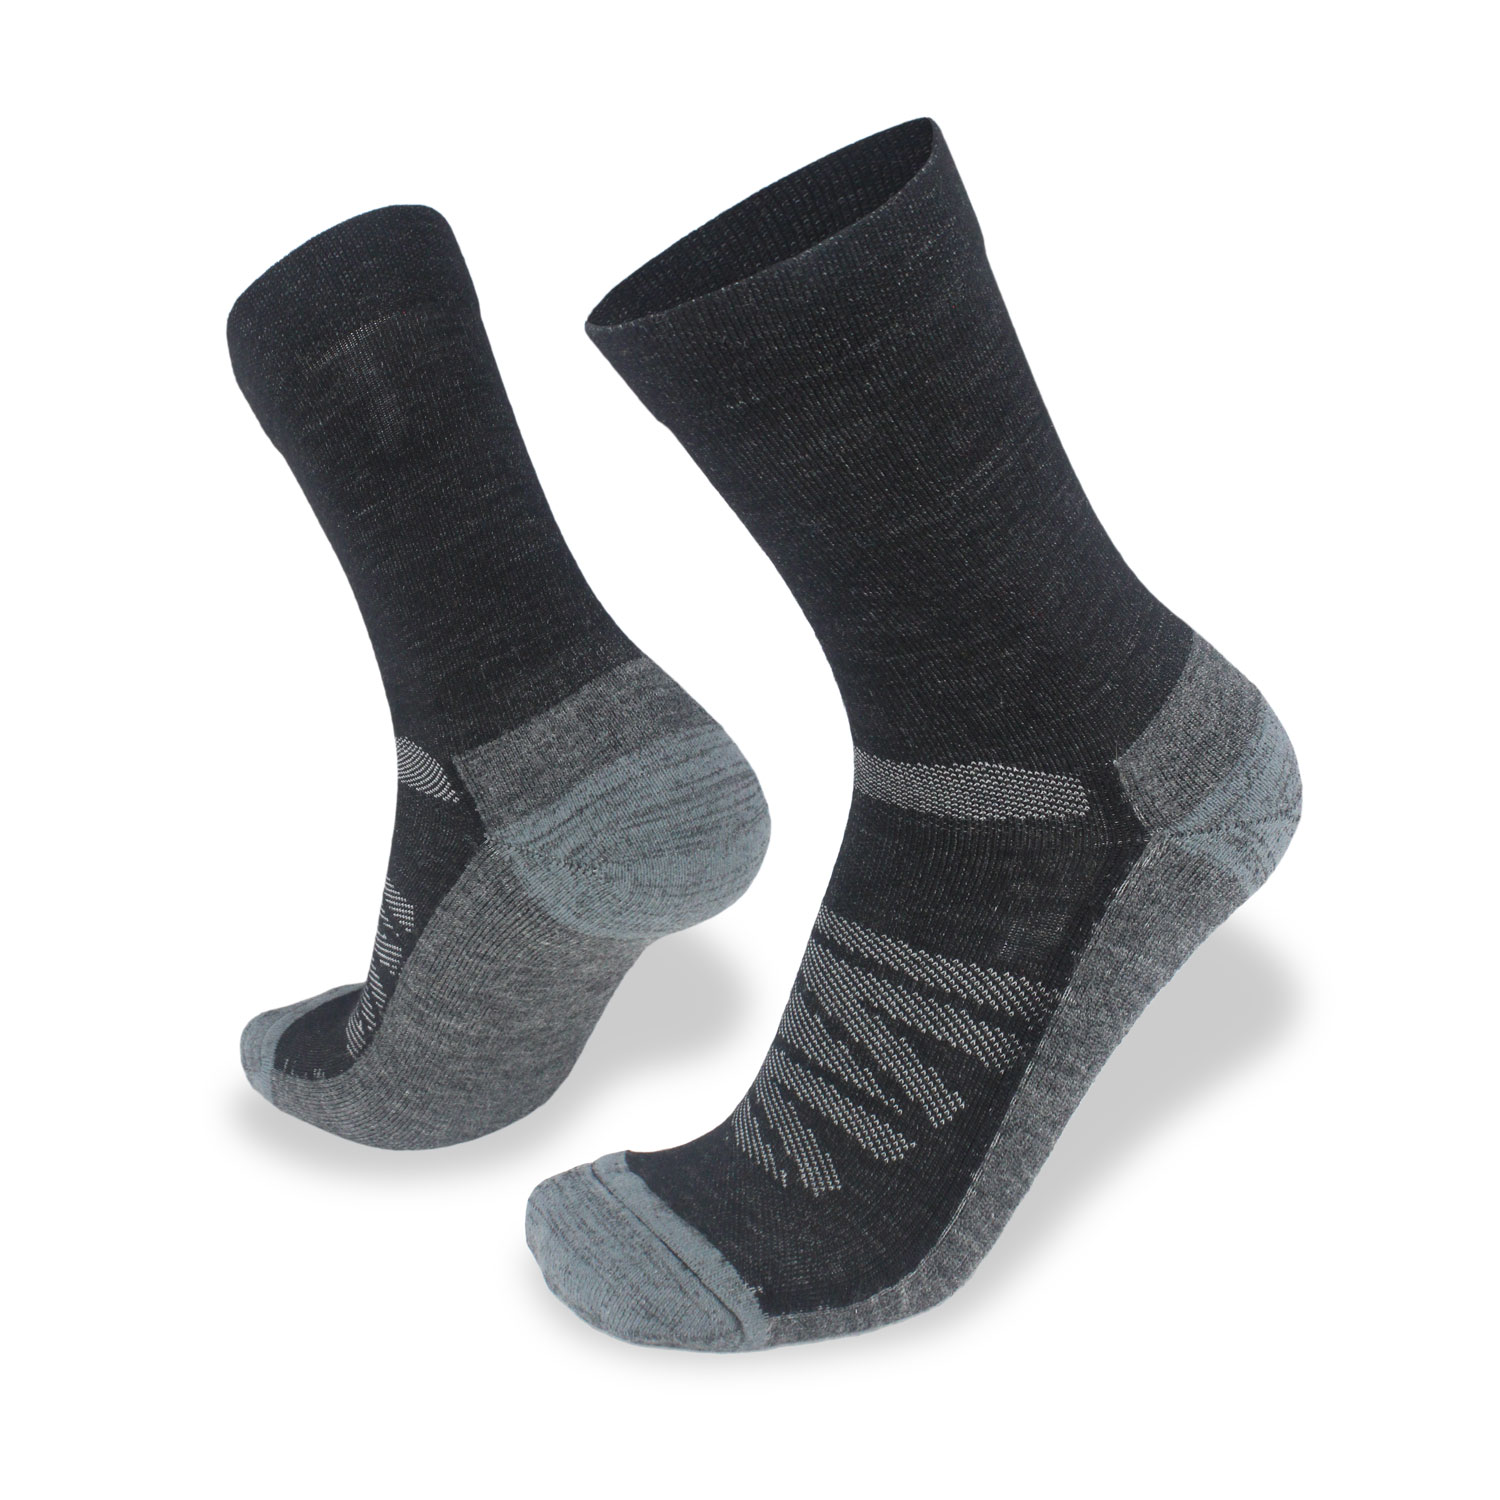 Cape To Cape eXtreme 1.0 Light Hiking Socks - Wilderness Wear